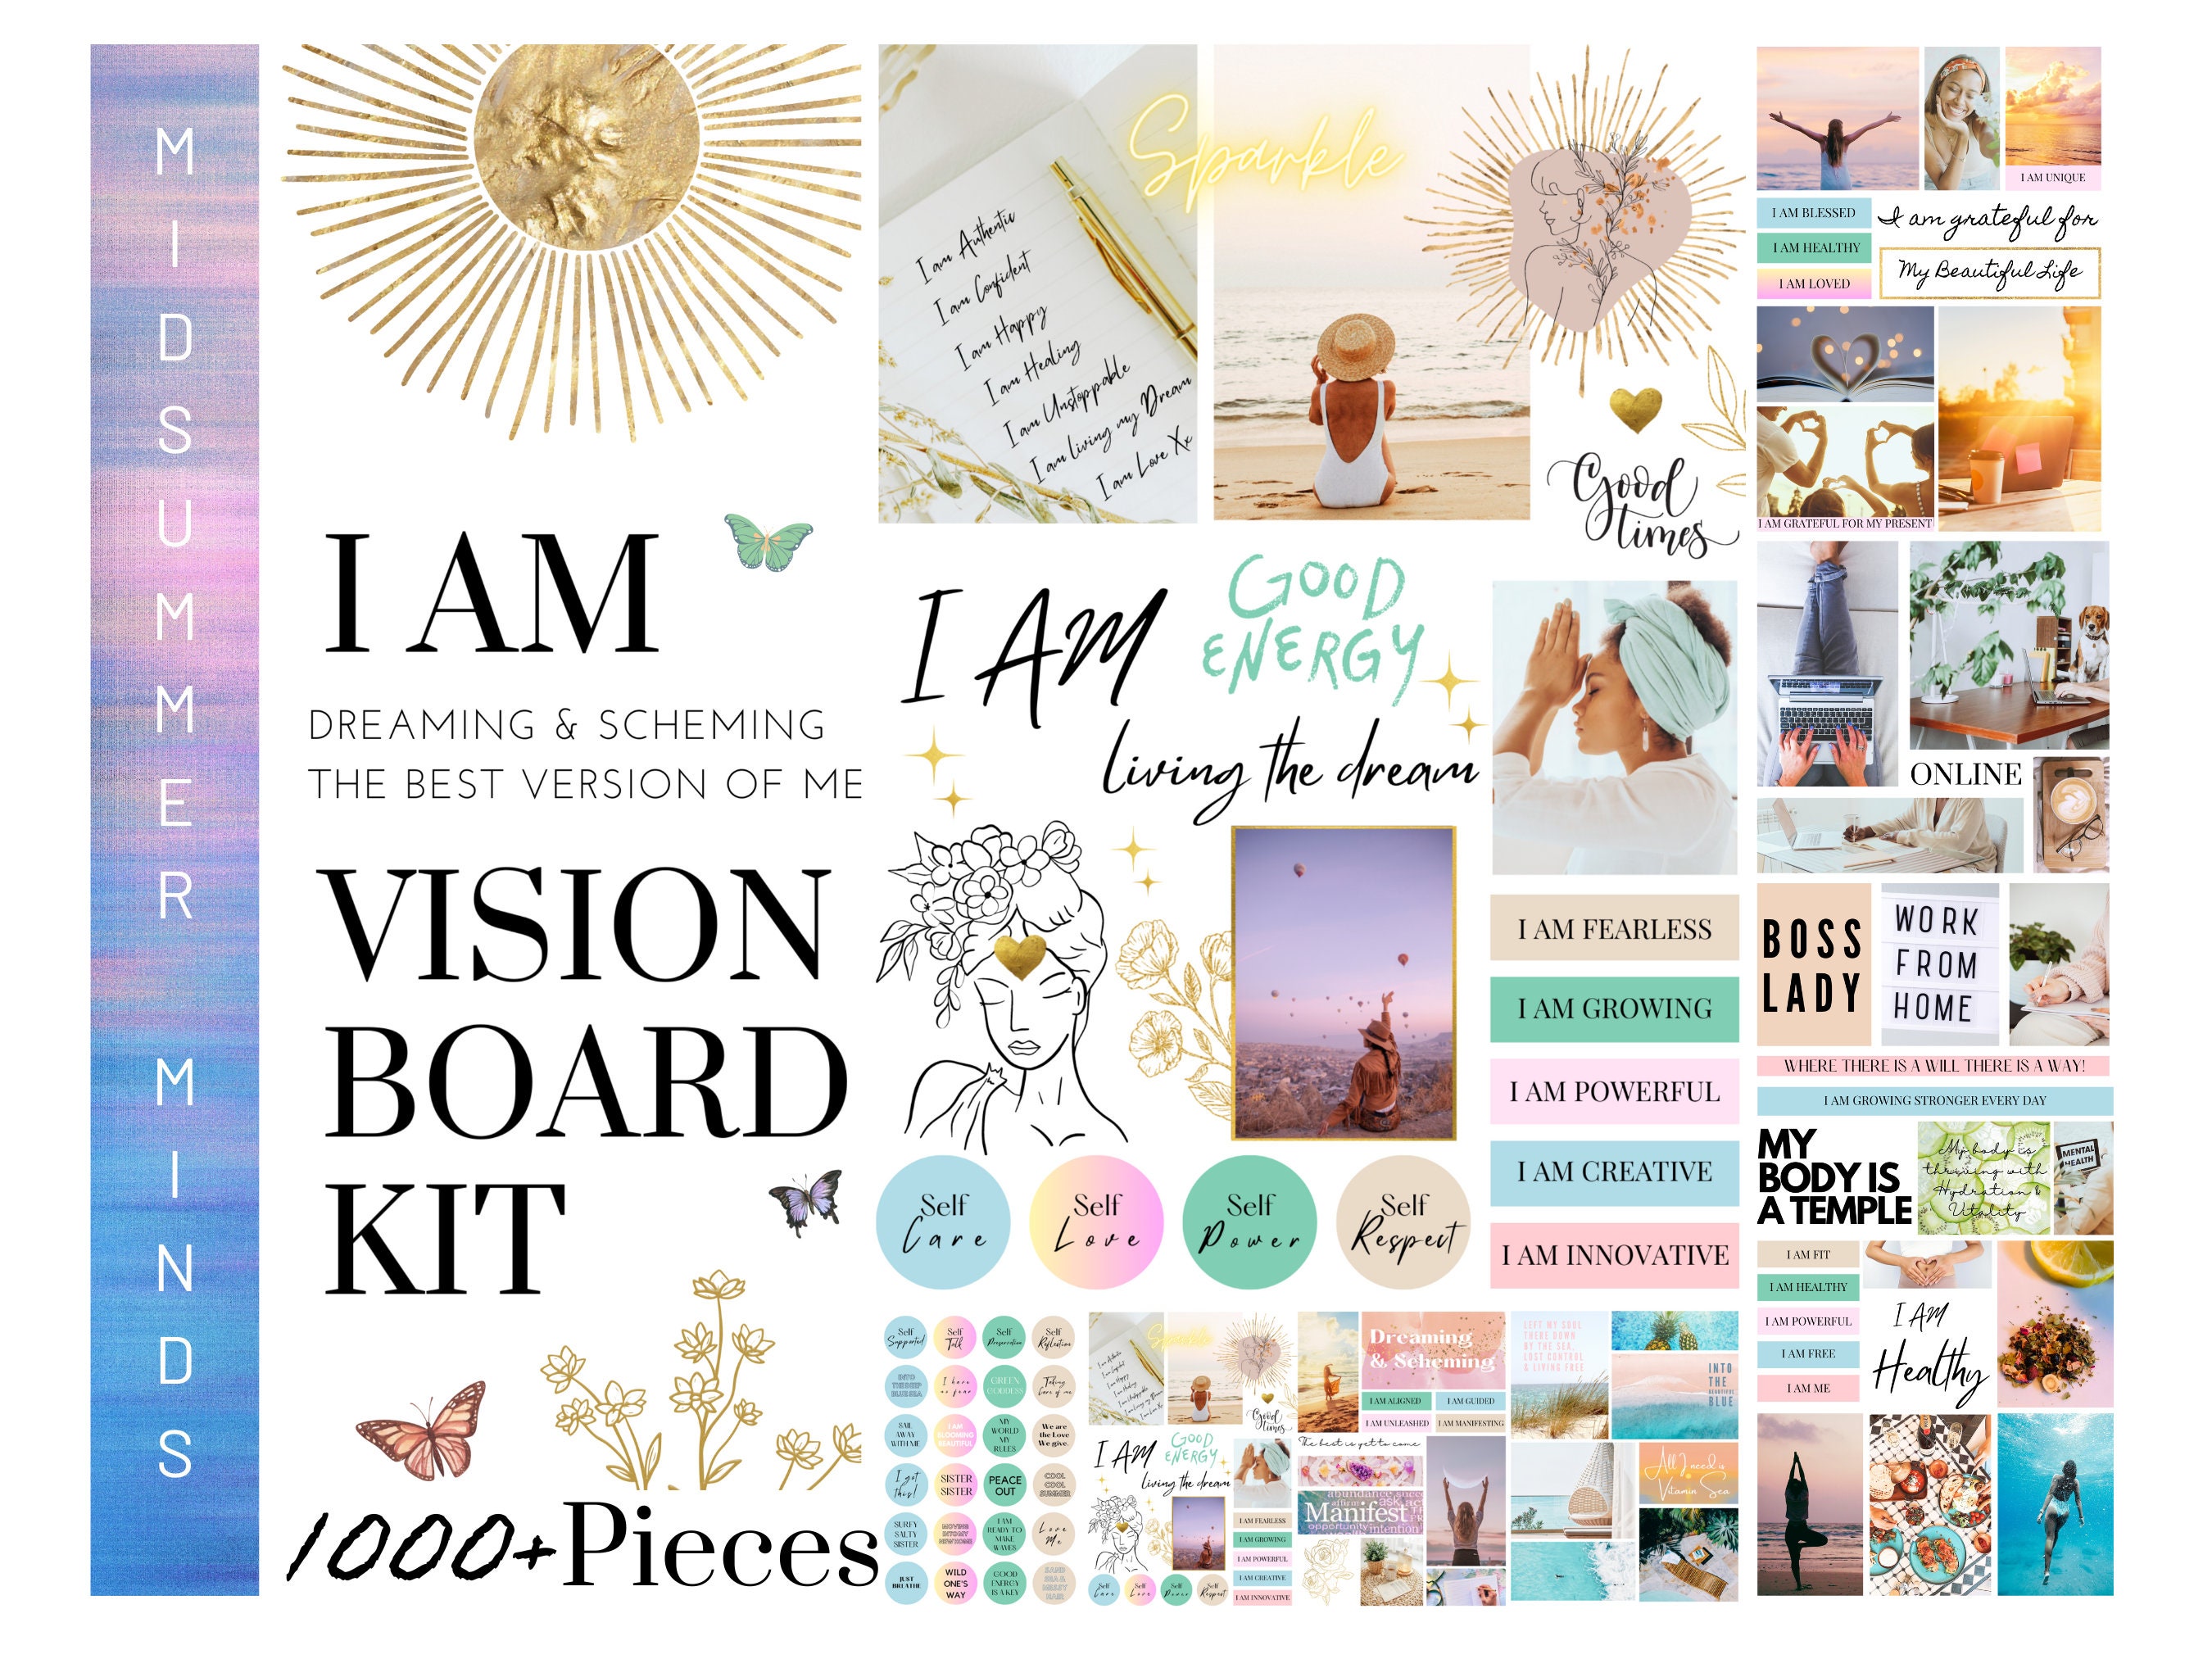 2023 Vision Board Clip Art Book For Black Women: 300+ Pictures, Quotes,  Motivation, Manifesting & Affirmation Journal, Vision Board Supplies,  Board Magazine For Black Women